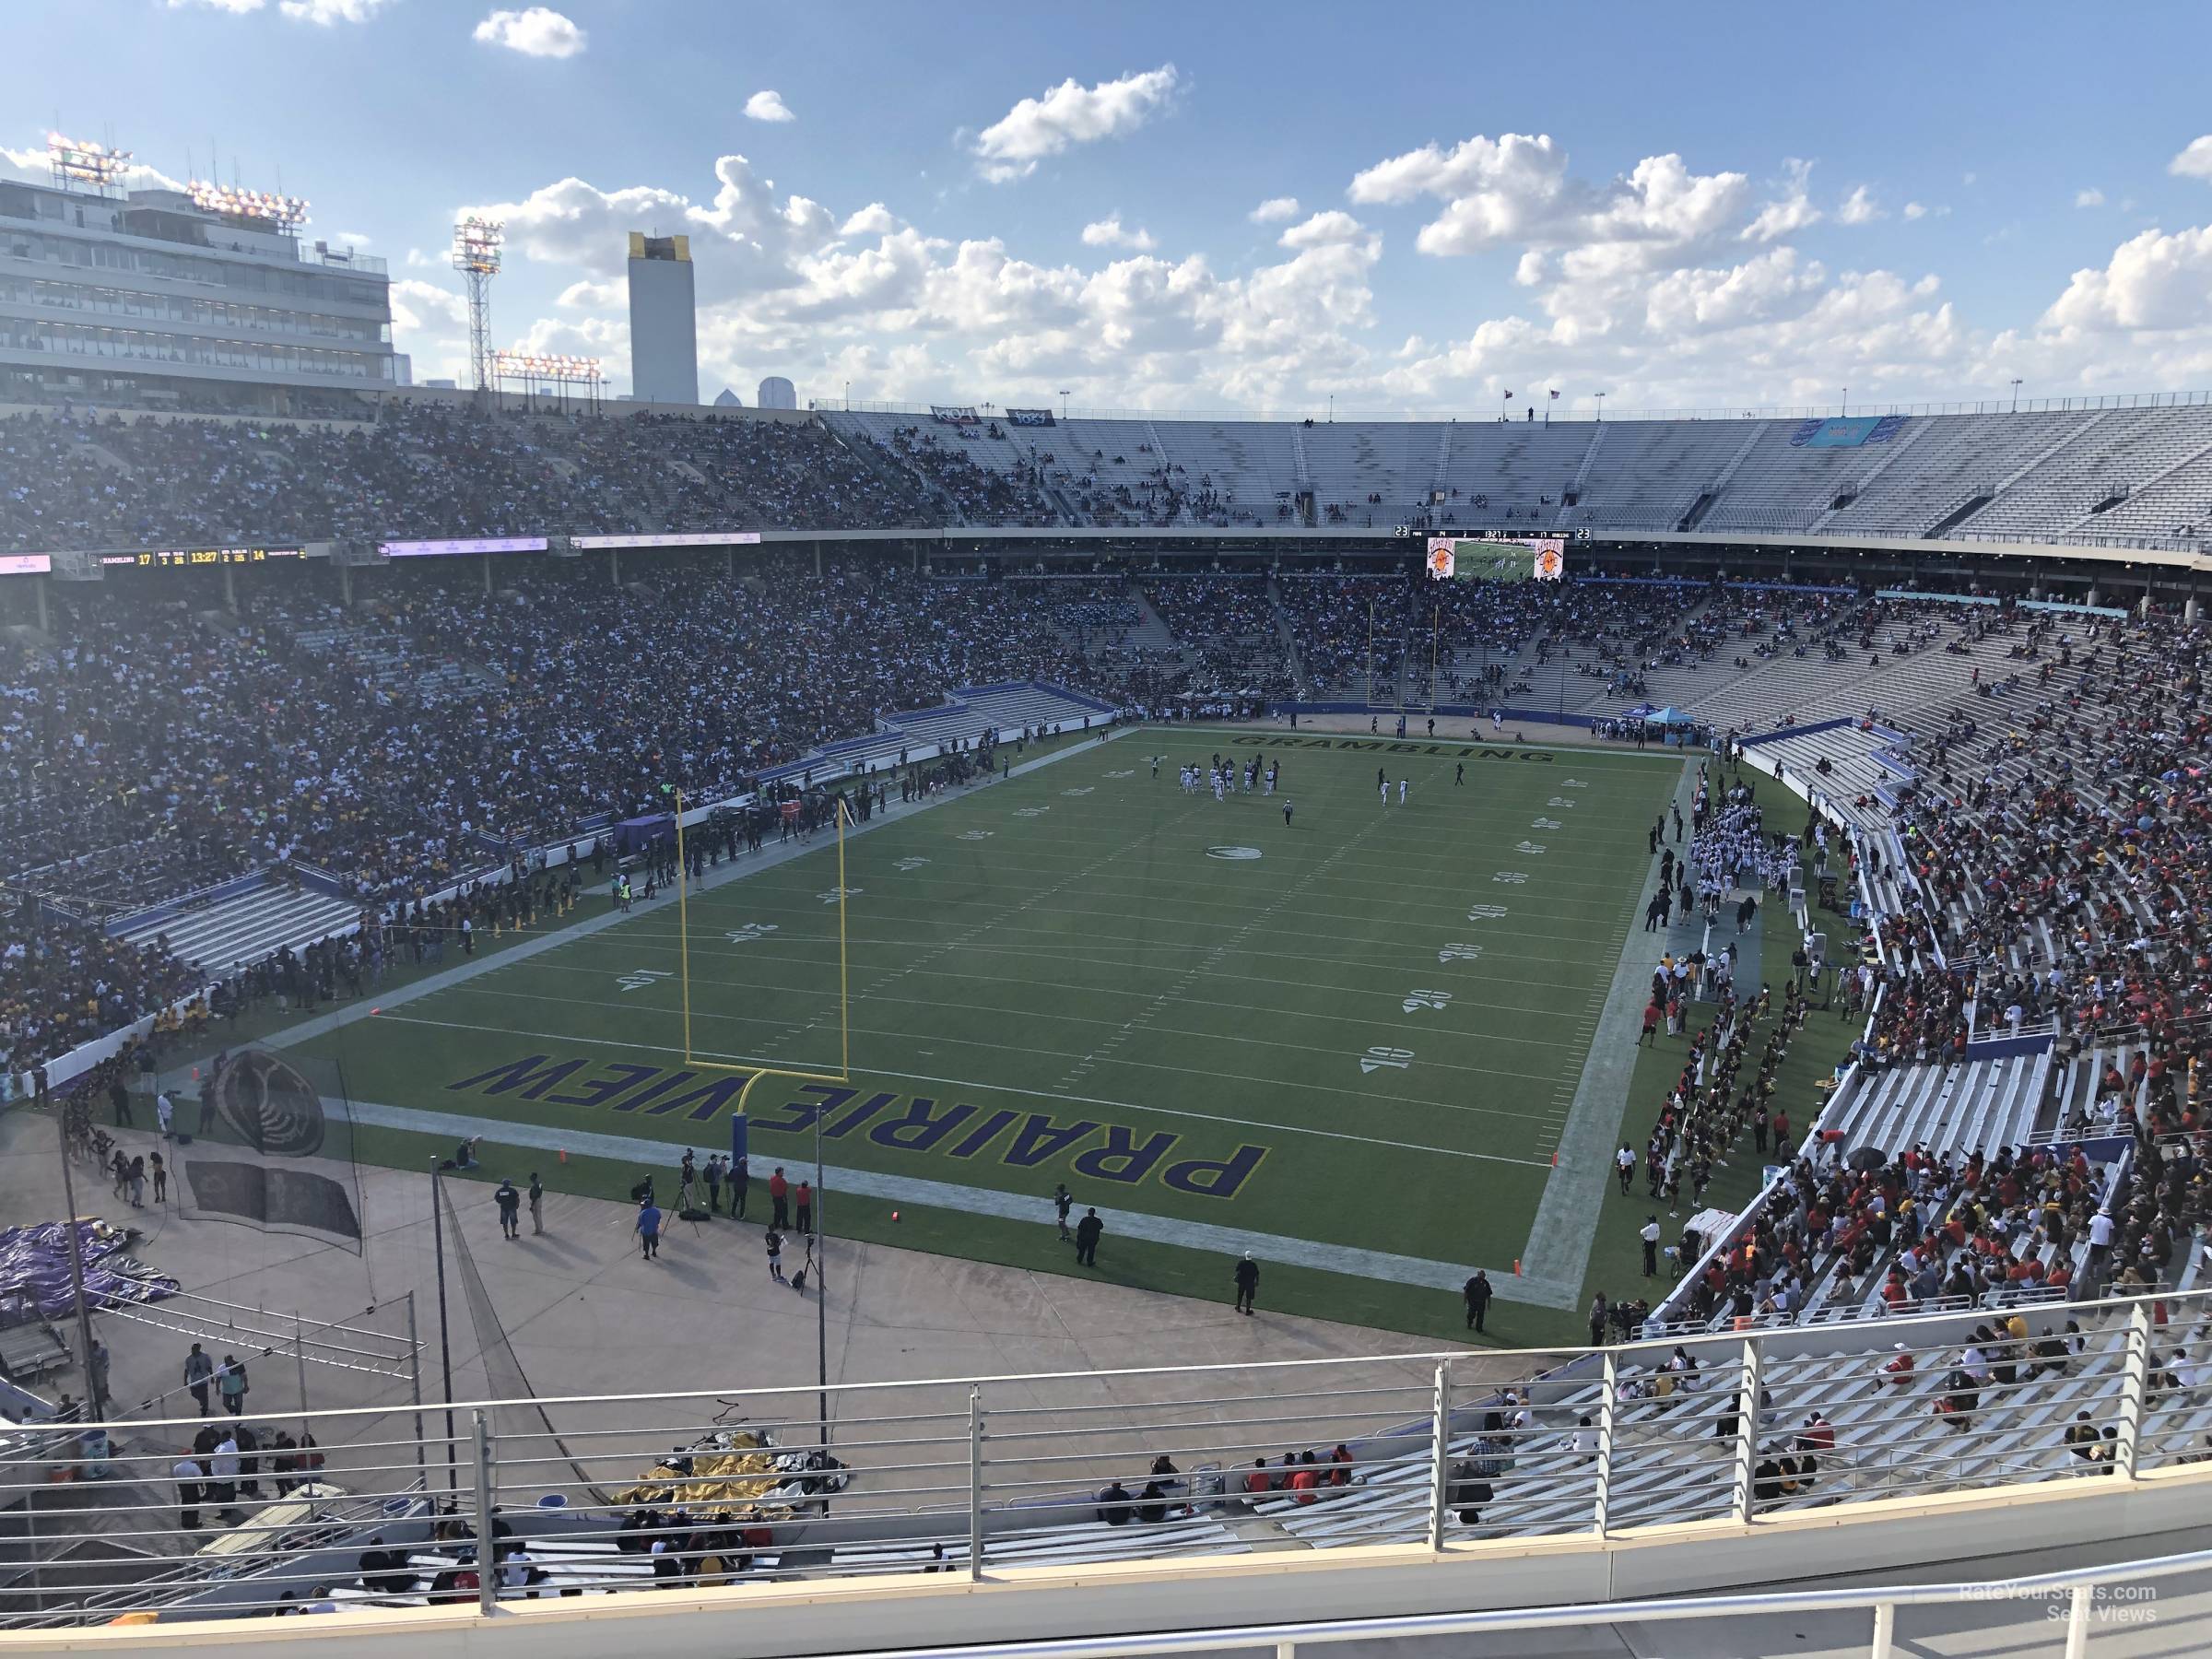 section 137, row 8 seat view  - cotton bowl